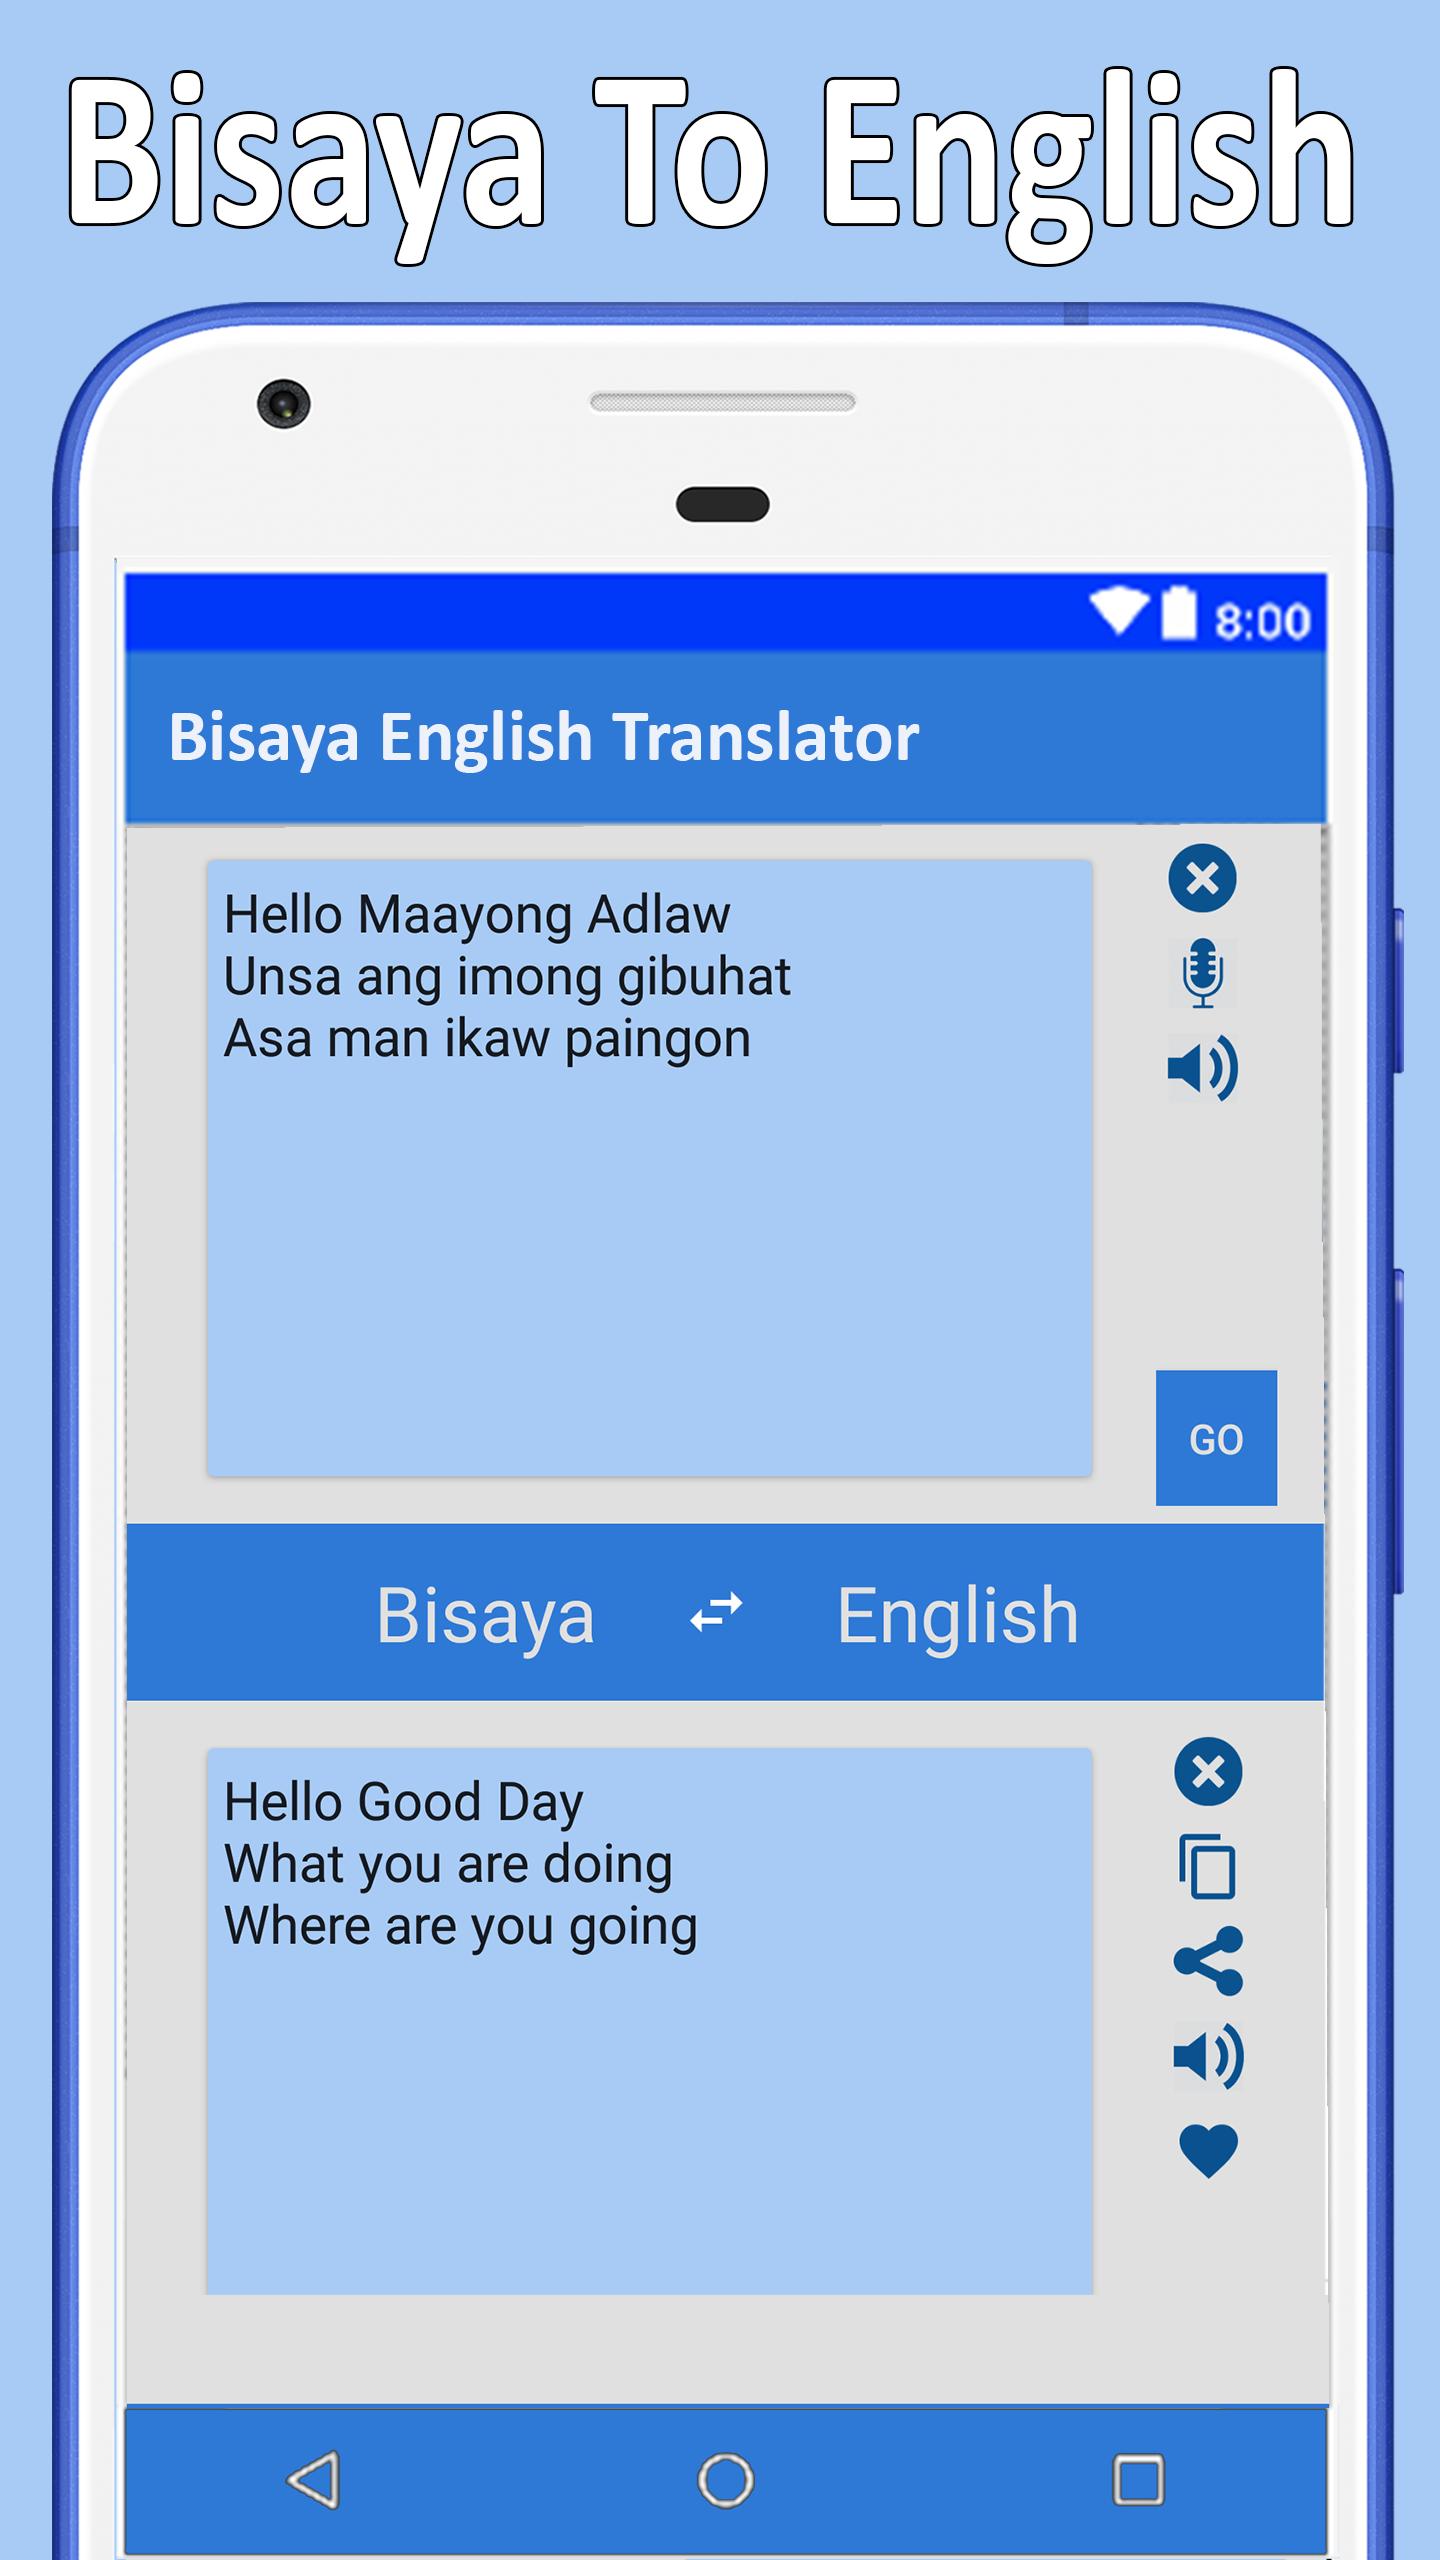 Bisaya Translate to English for Android - APK Download